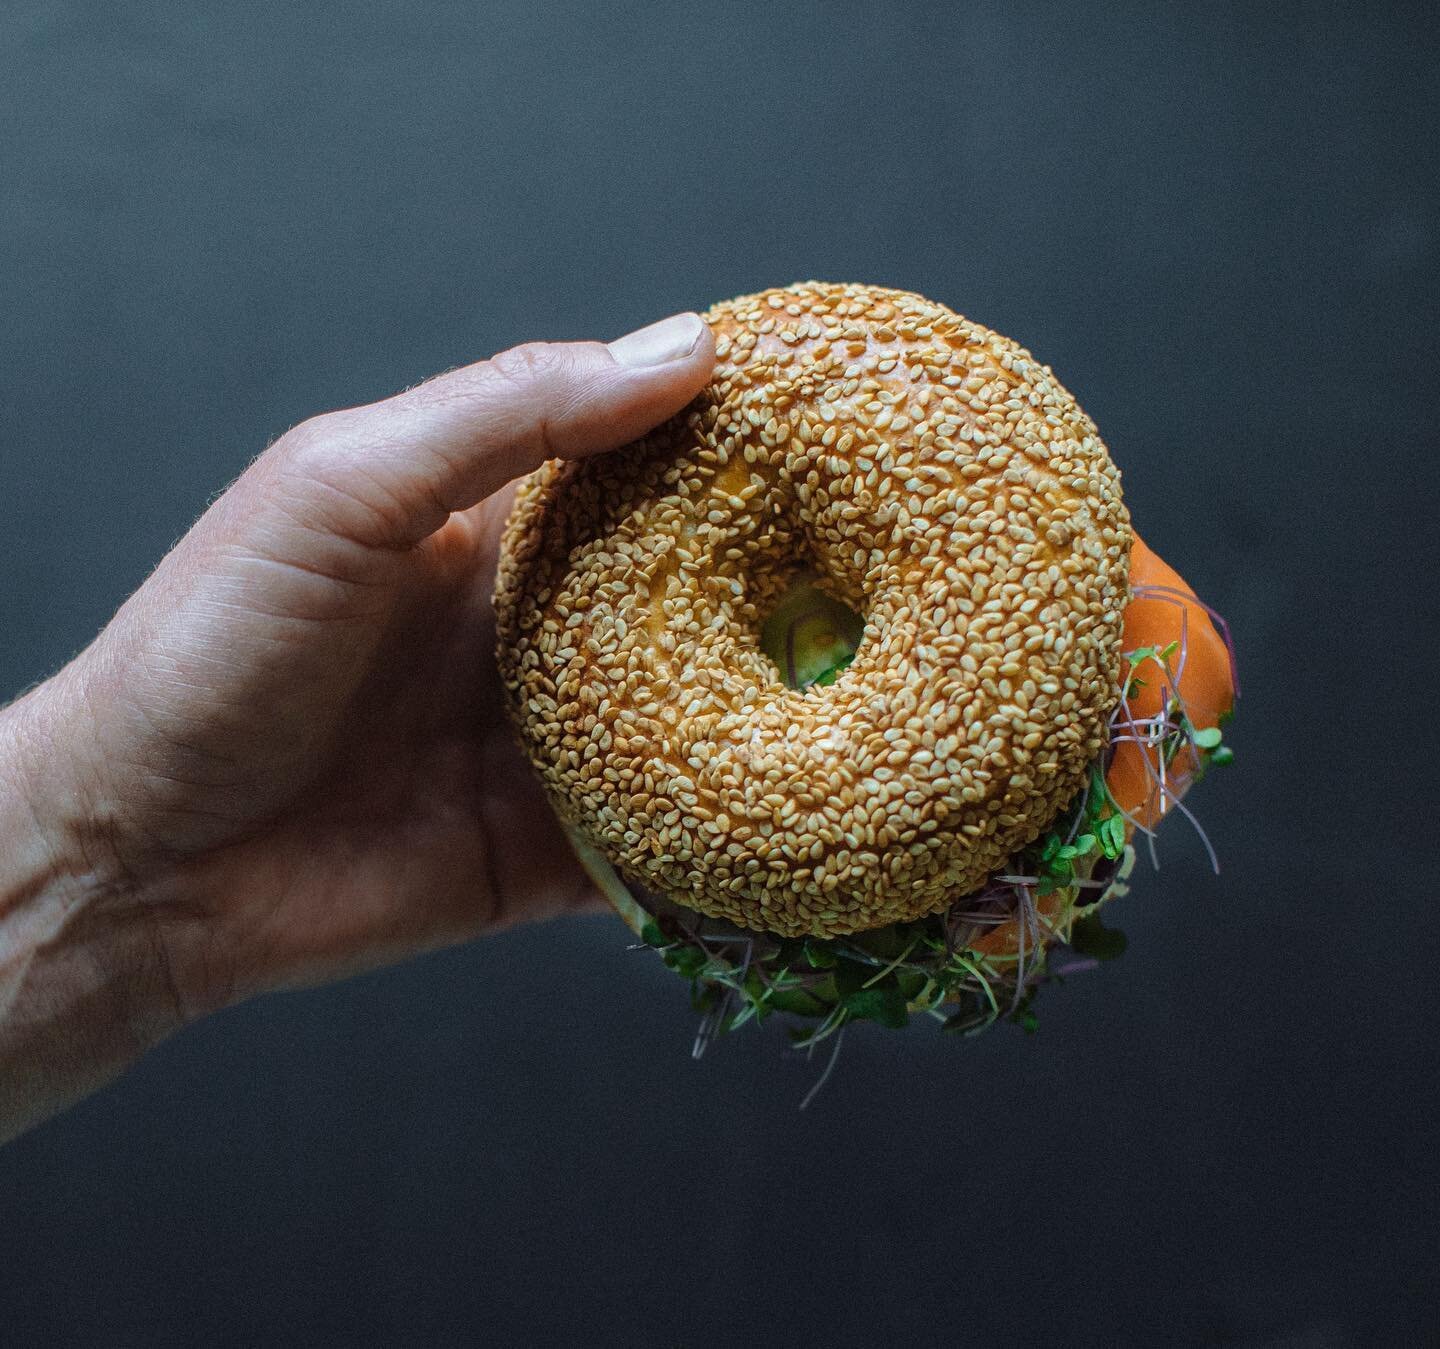 Bagels are back @morningtide.shop on 3rd Thursday&rsquo;s of the month! 💥
This Thursday 4/21, we&rsquo;ll be there 10-2 (or til sold out), with fresh, sourdough bagels, schmears, full menu, rugelach and matzah bark. 
Pre-order is now open for everyt